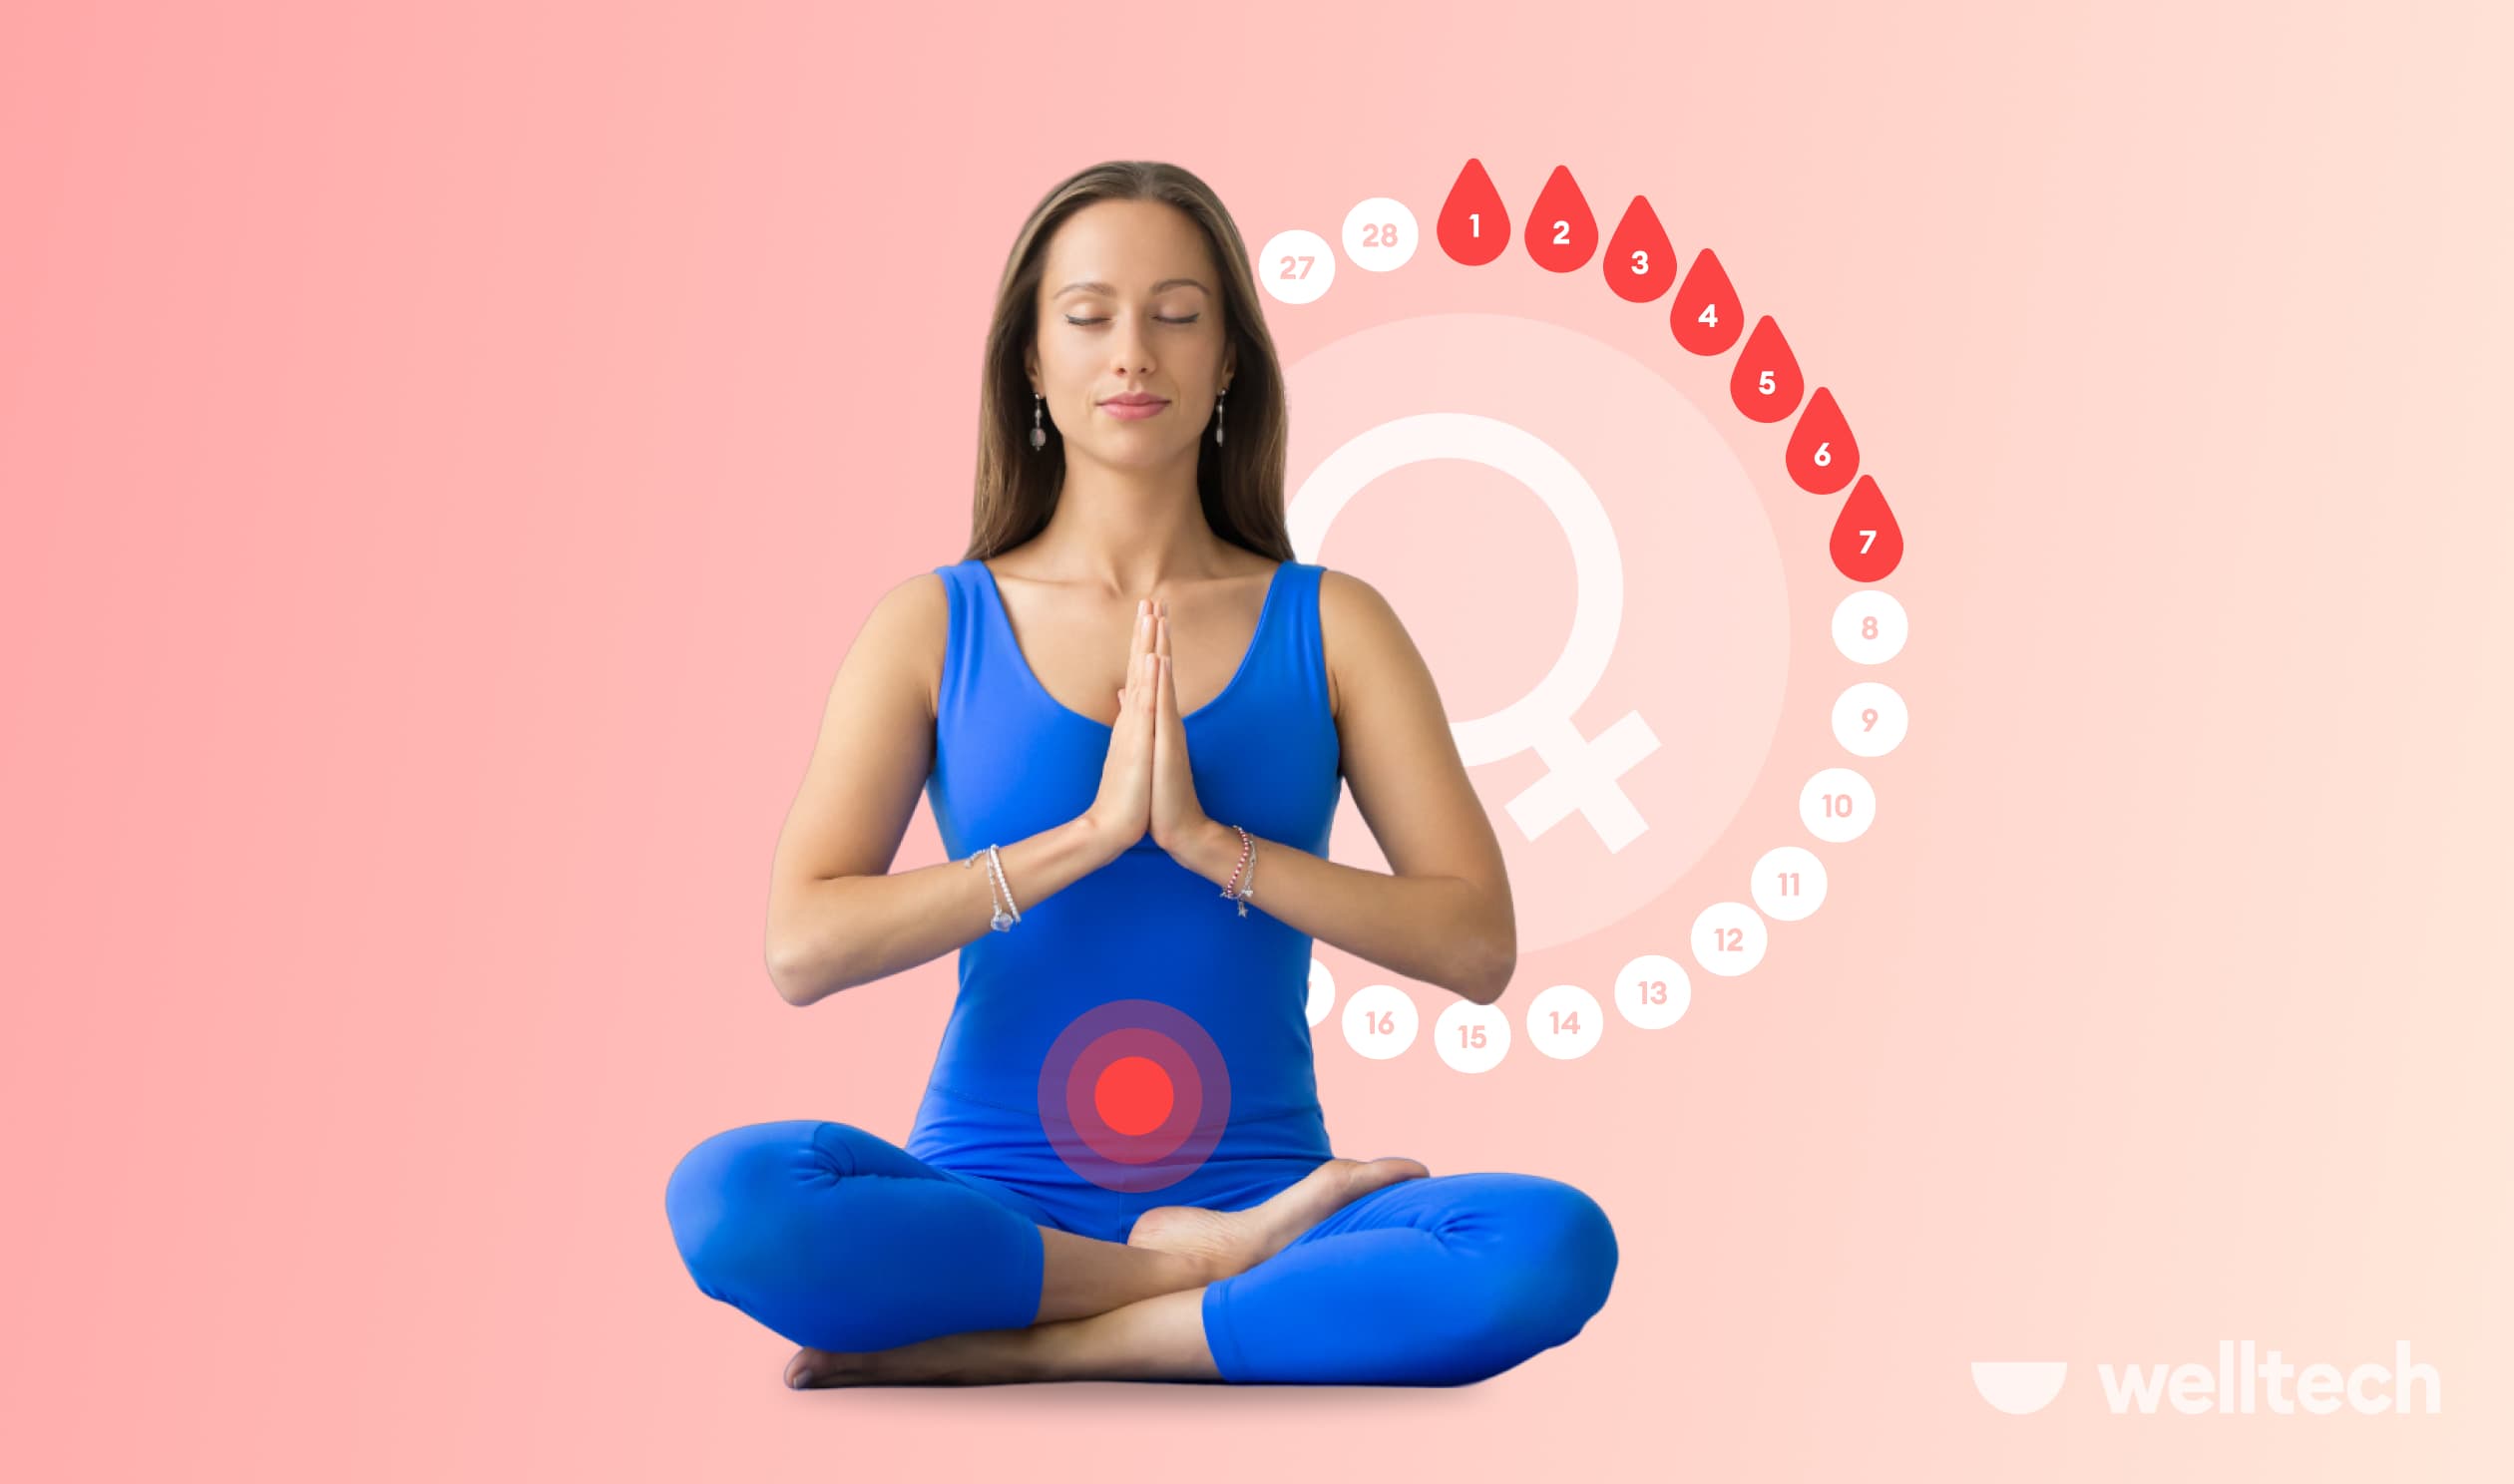 a woman is doing yoga, wearing blue sportswear, sitting in Easy Pose with her hands to prayer, illustration of a menstrual cycle in the background, yoga for period cramps